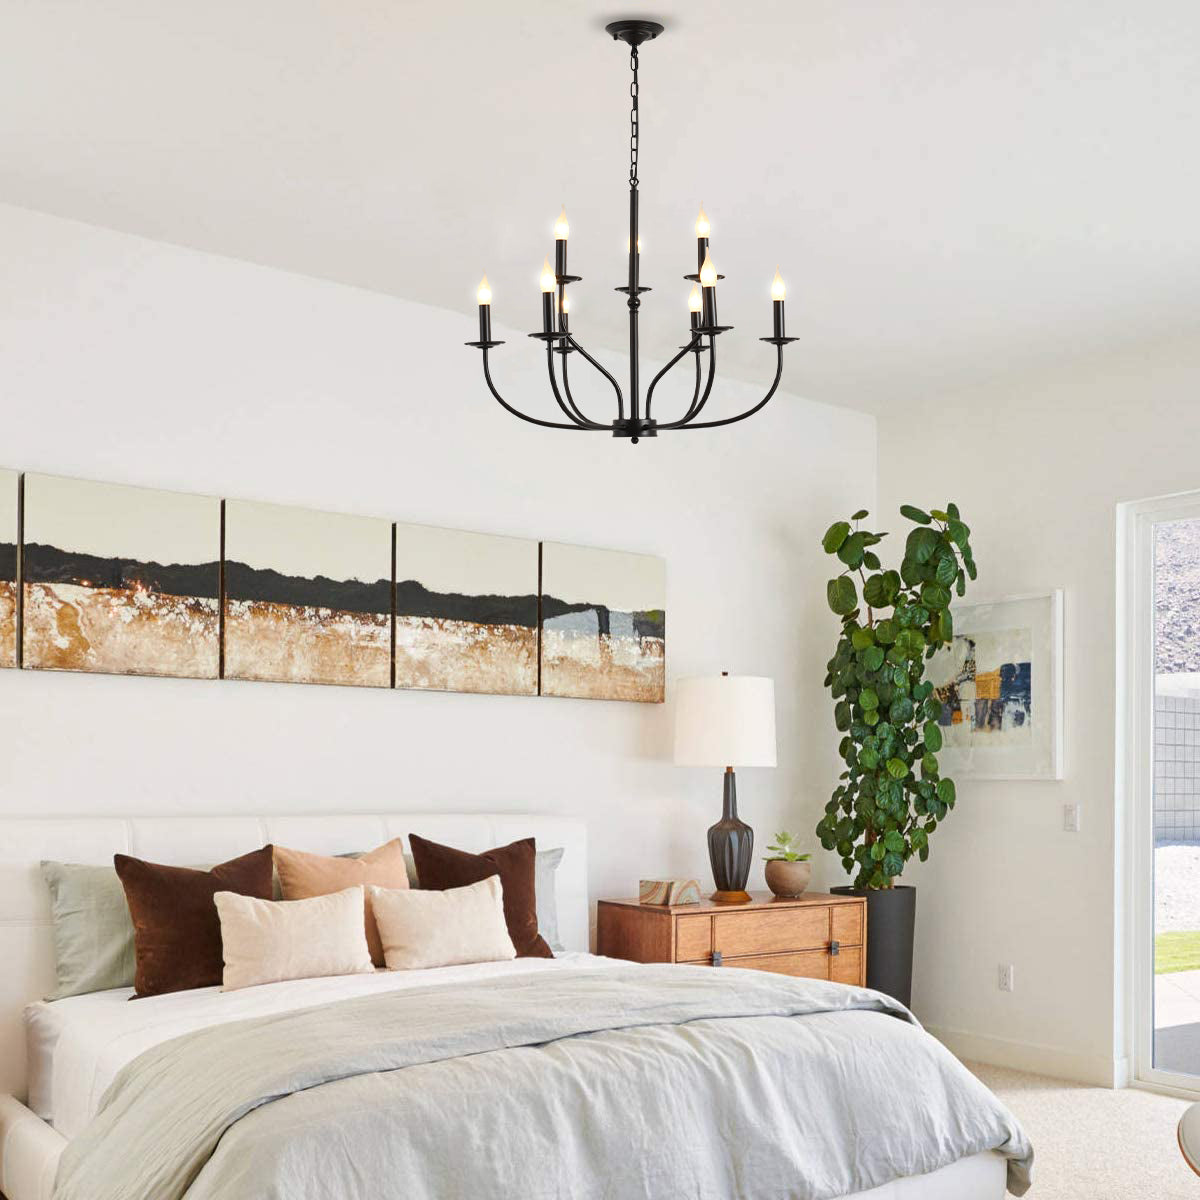 Nine Bulb Classic Black Chandelier shown hung in primary bedroom